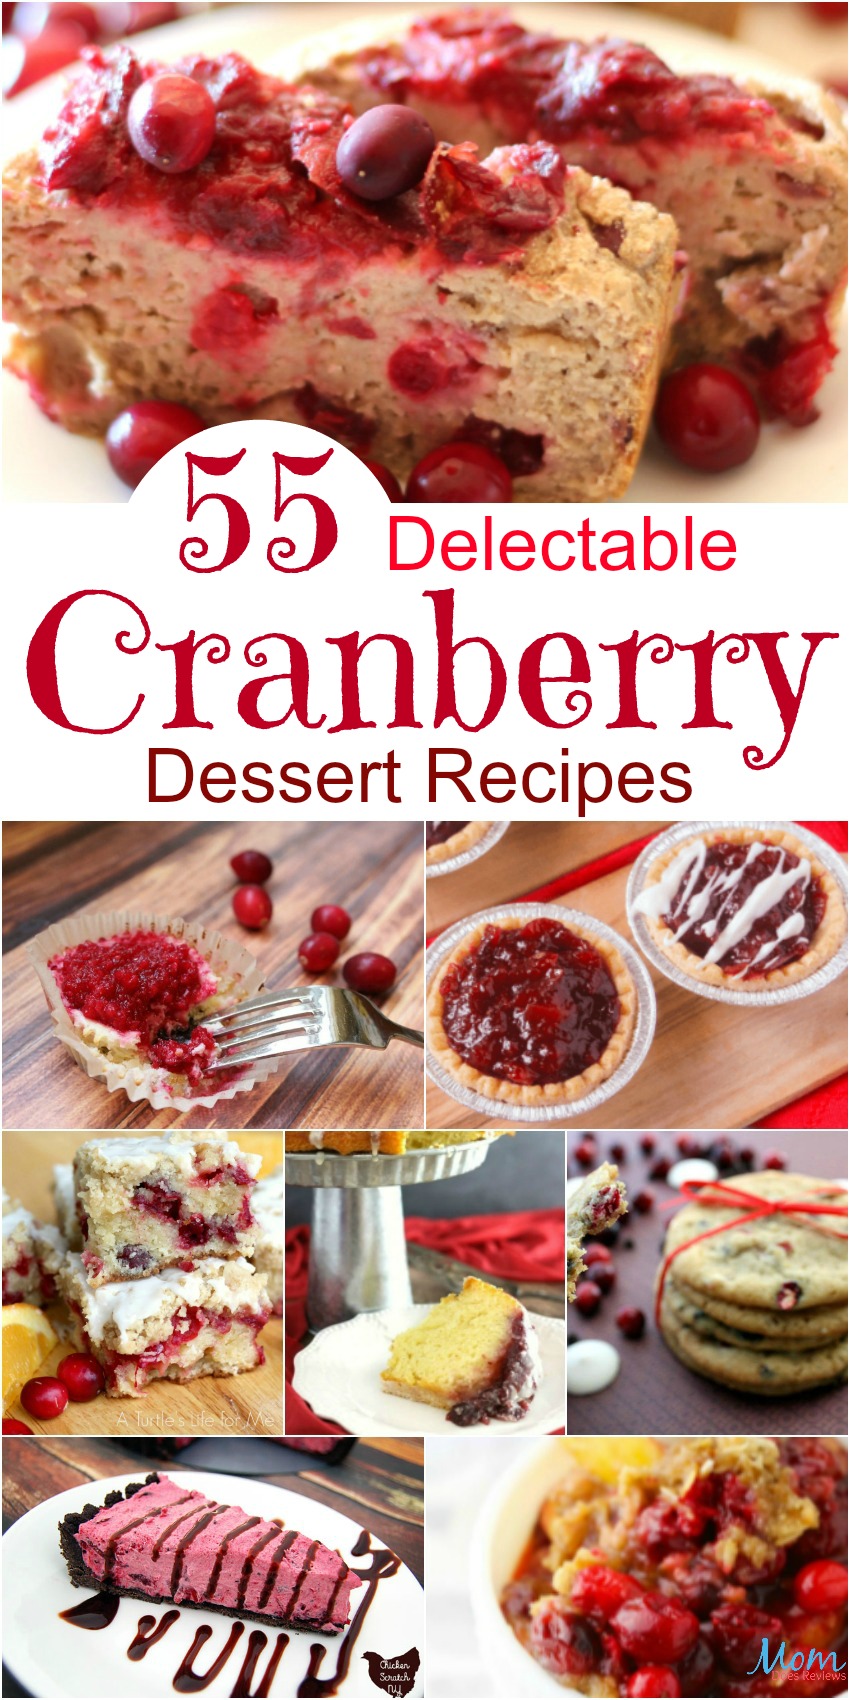 55 Delectable Cranberry Dessert Recipes Perfect for the Holidays